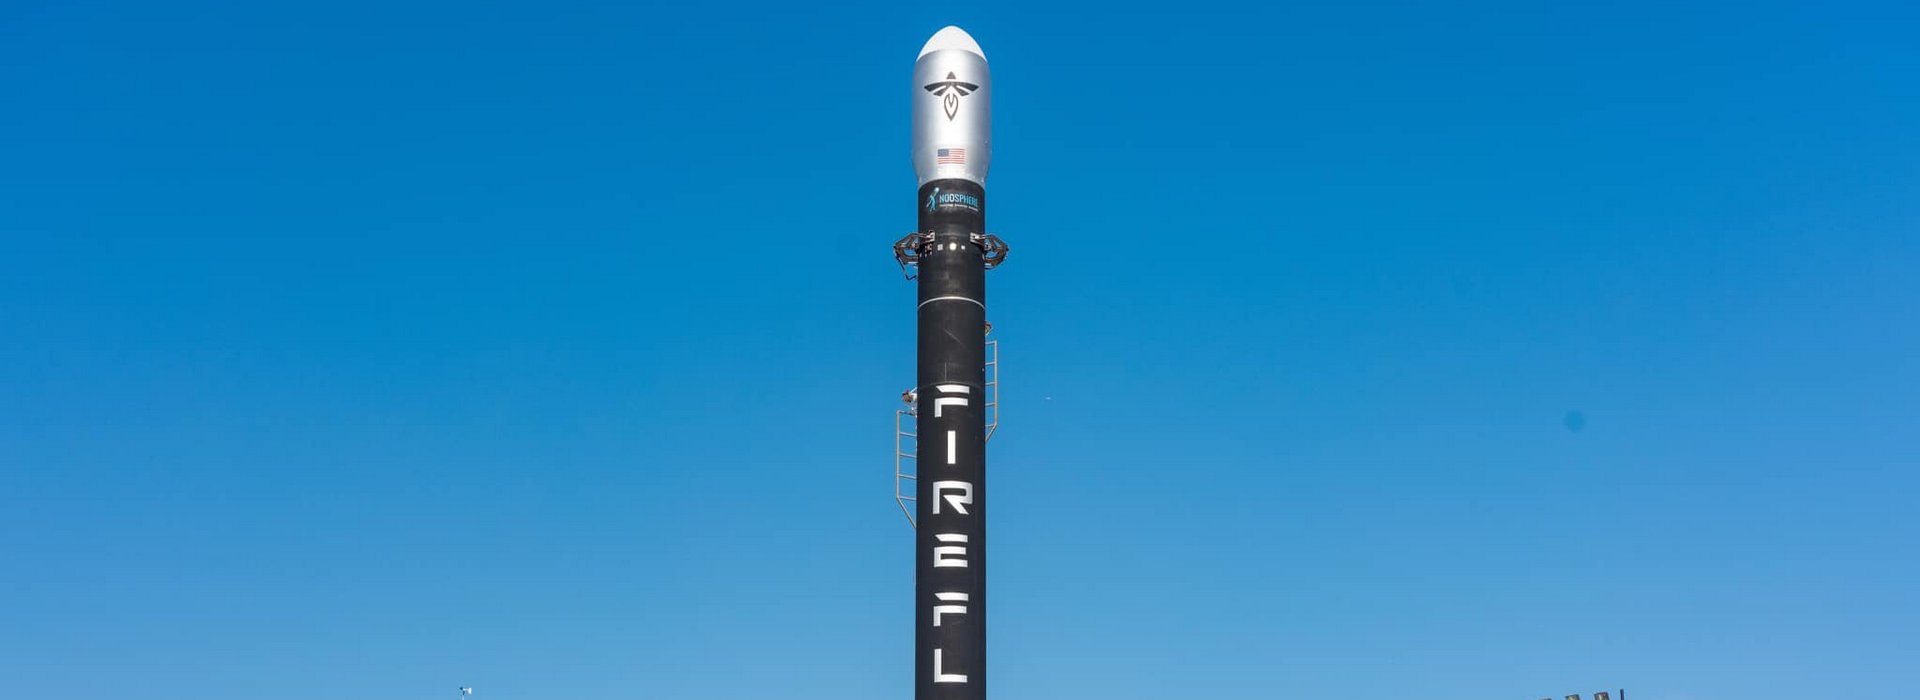 Firefly Aerospace Launched Its Alpha Rocket for the First Time